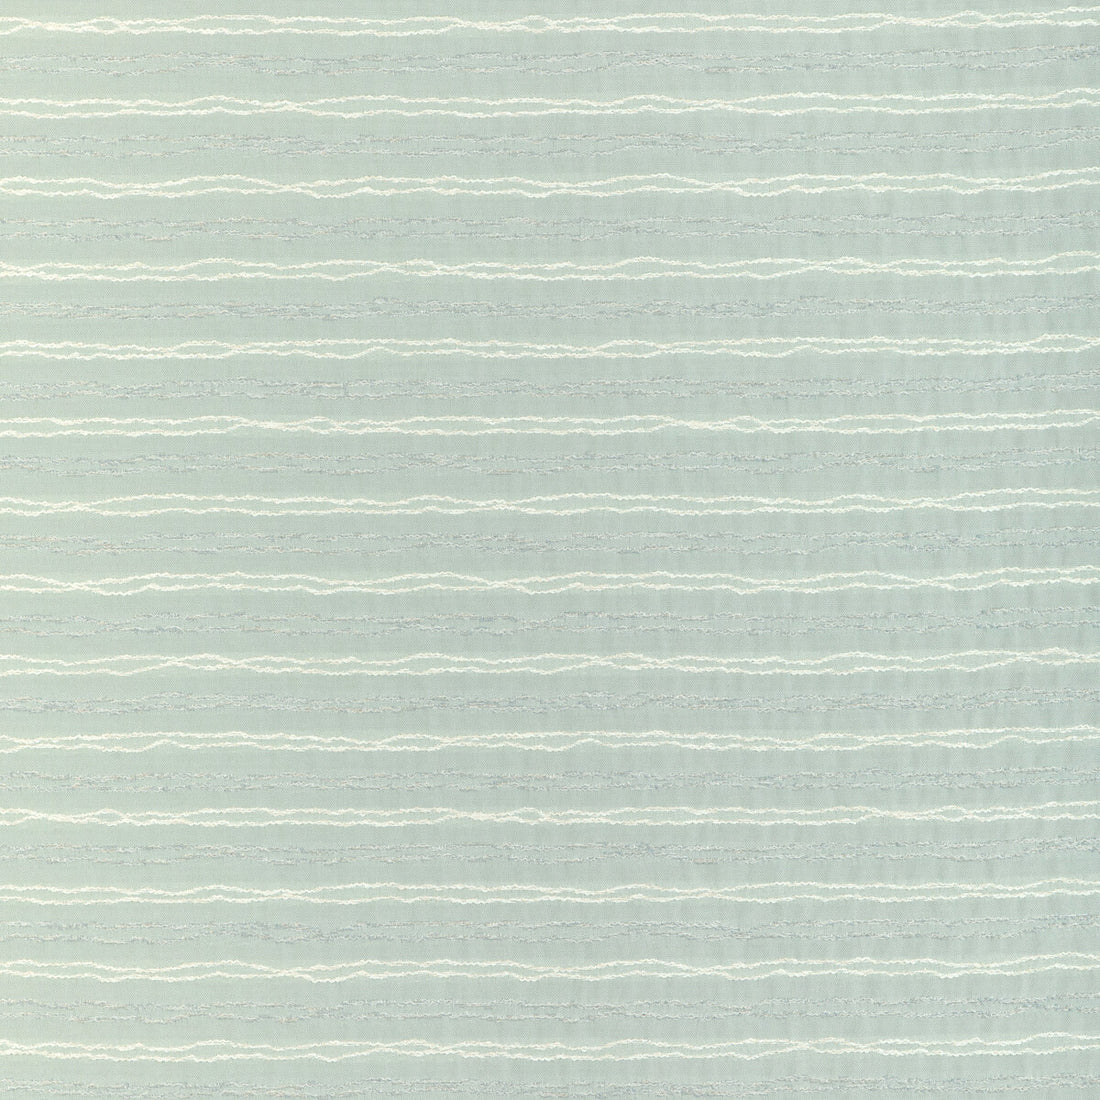 Wave Length fabric in spray color - pattern 37057.13.0 - by Kravet Design in the Thom Filicia Latitude collection